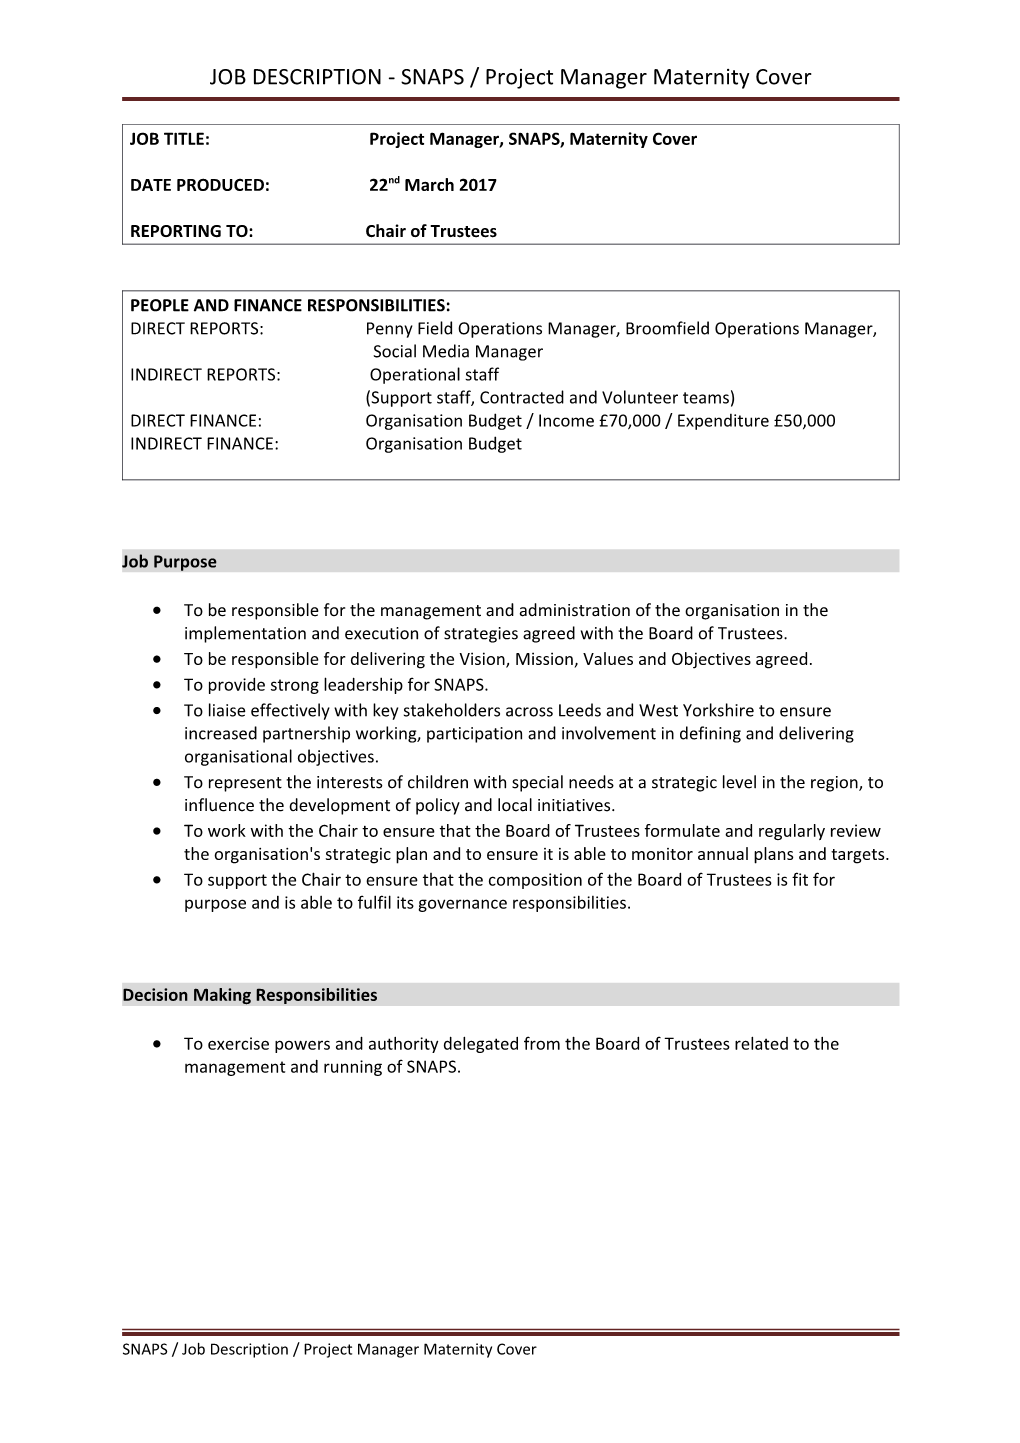 JOB DESCRIPTION - SNAPS / Project Manager Maternity Cover